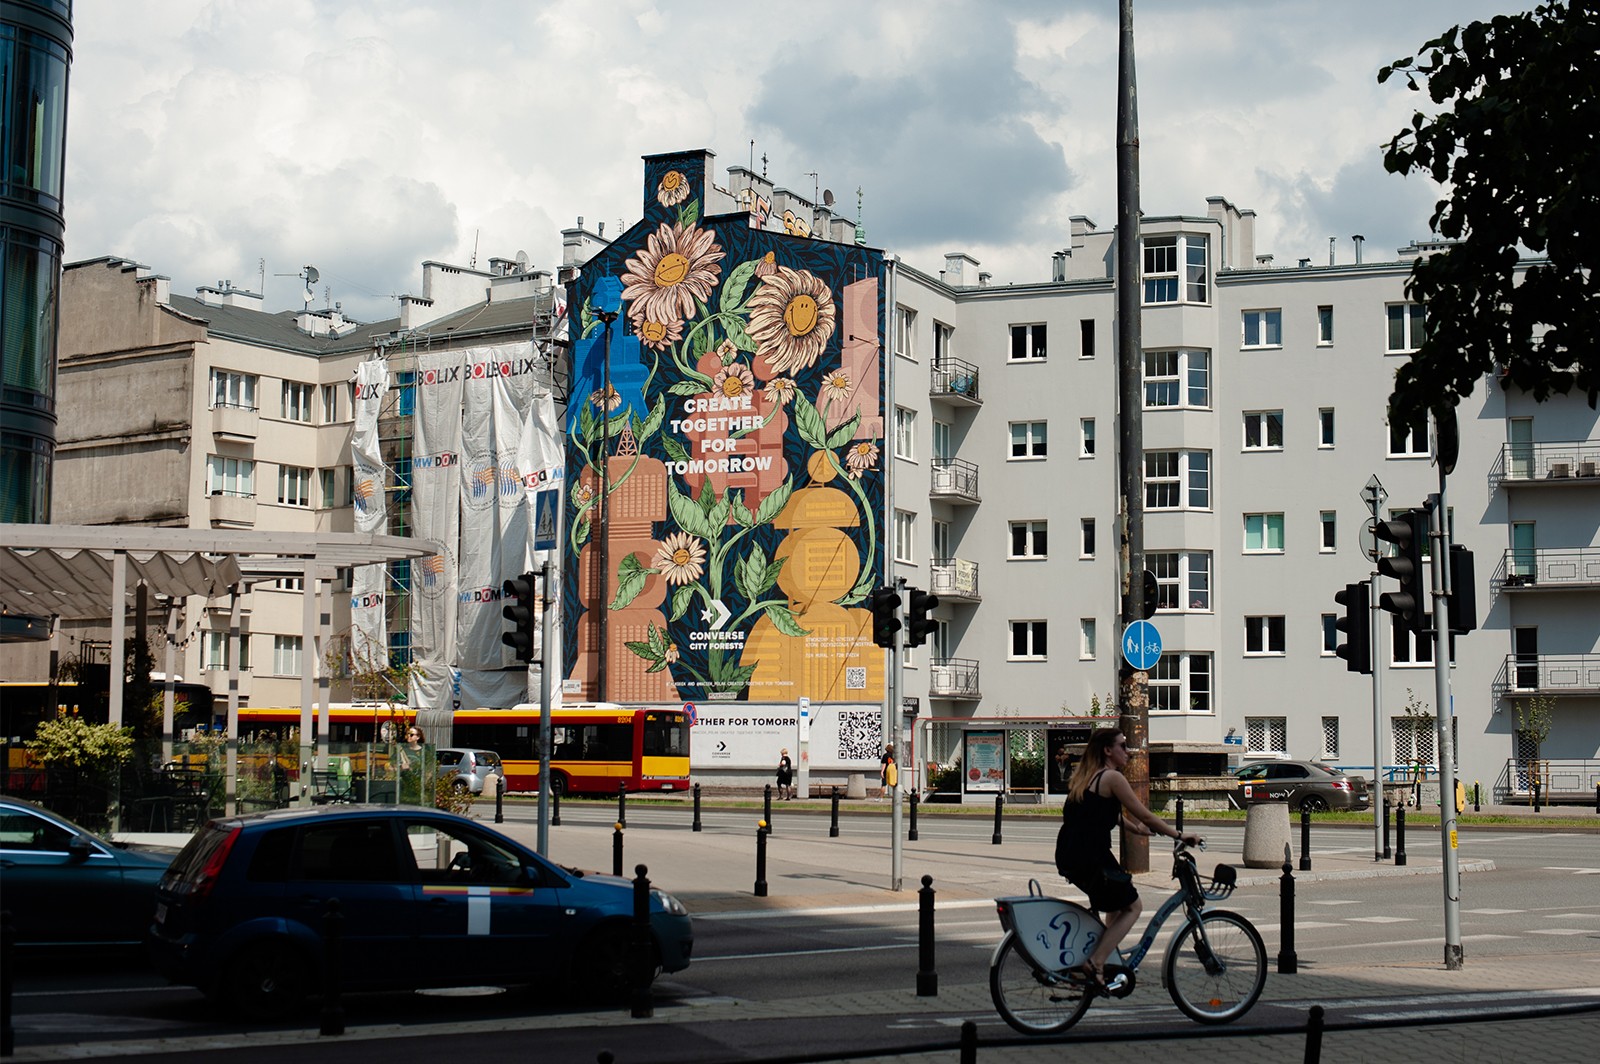 Artistic Converse mural in Warsaw | CREATE TOGETHER FOR TOMORROW | Portfolio